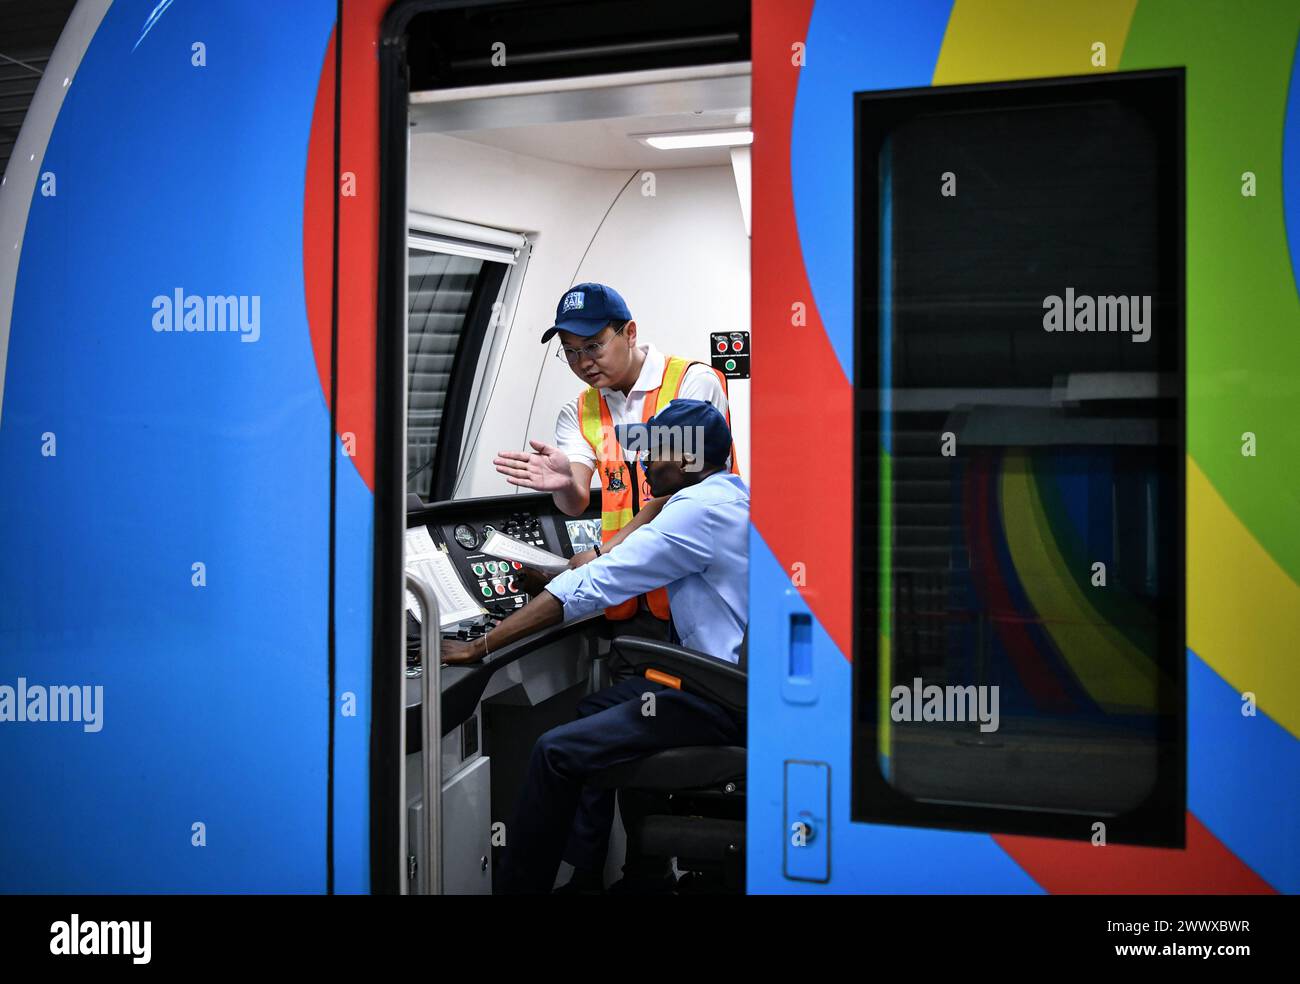 (240326) -- LAGOS, March 26, 2024 (Xinhua) -- Chinese driver Wang Aofei (rear) guides trainee driver Awhangansi at the cab on a train of the Lagos Rail Mass Transit (LRMT) Blue Line in Lagos, Nigeria, March 3, 2024. Undertaken by China Civil Engineering Construction Corporation (CCECC) in July 2010 and completed in Dec. 2022, the first phase of the Lagos Rail Mass Transit (LRMT) Blue Line corridor spans 13 km and covers five stations. It began commercial operation in Sept. of 2023. As a symbolic project of the Belt and Road Initiative, the Blue Line project is the first electrified railroad an Stock Photo